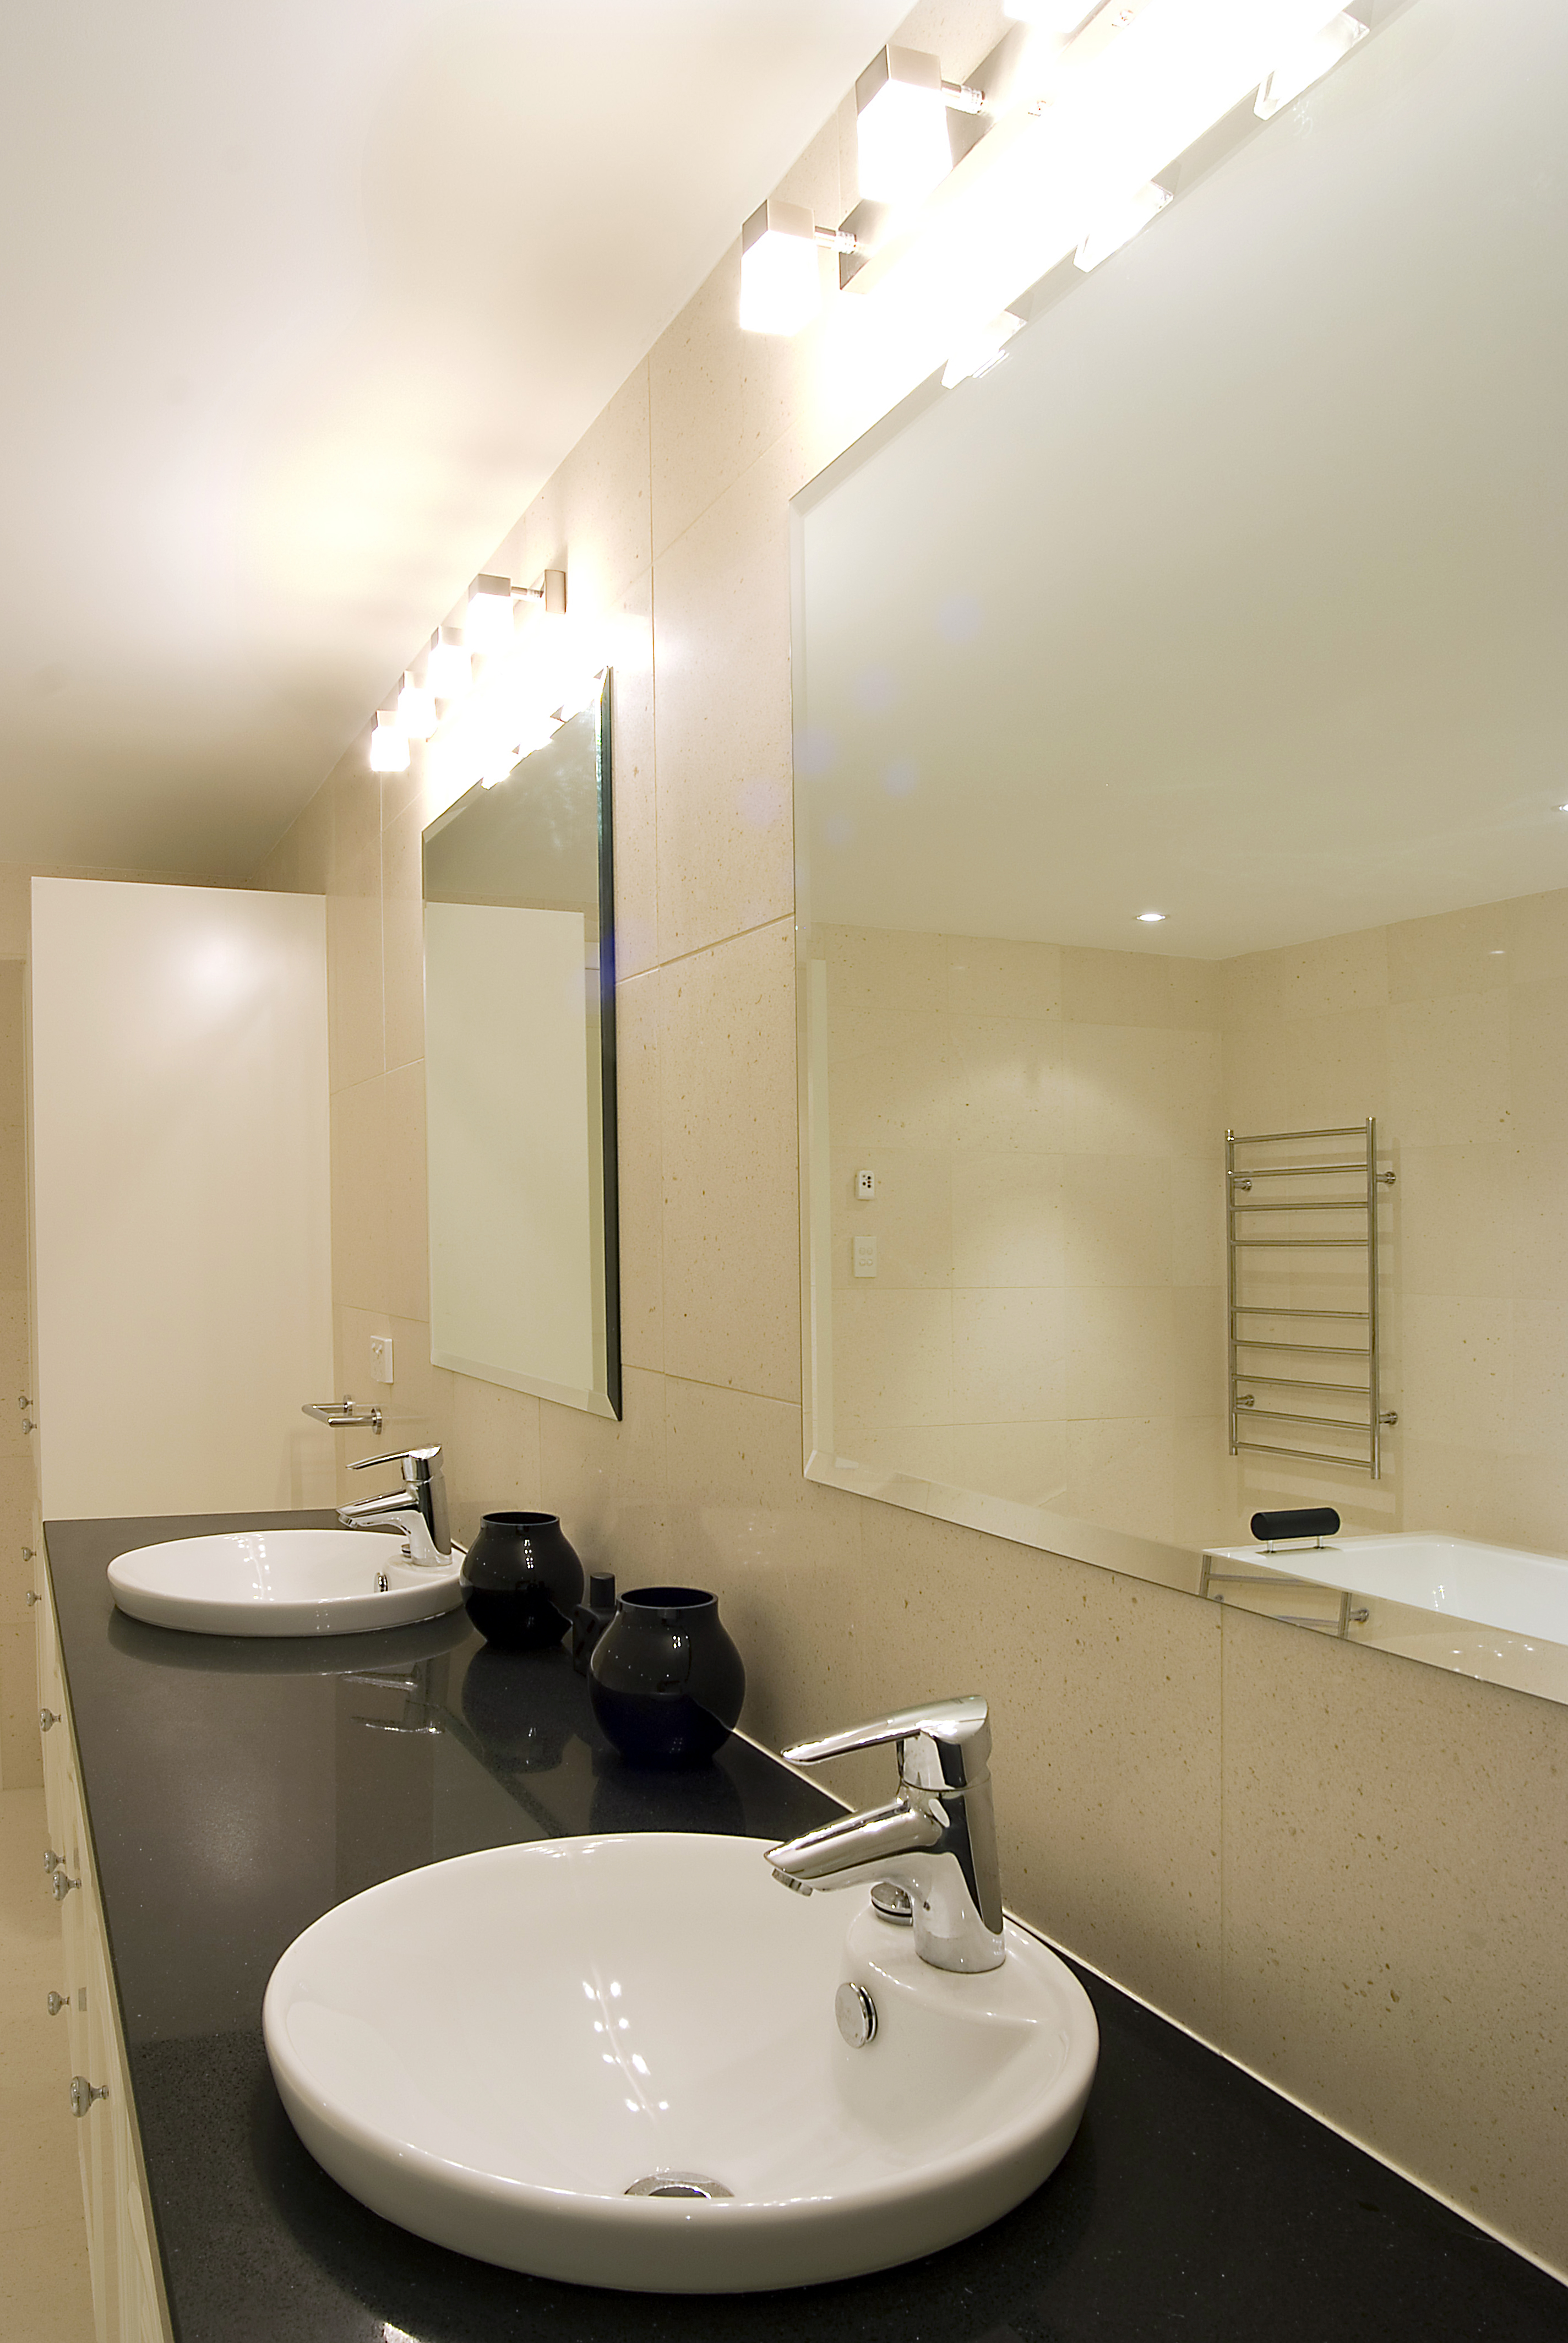 Carseldine wall lights over double vanity